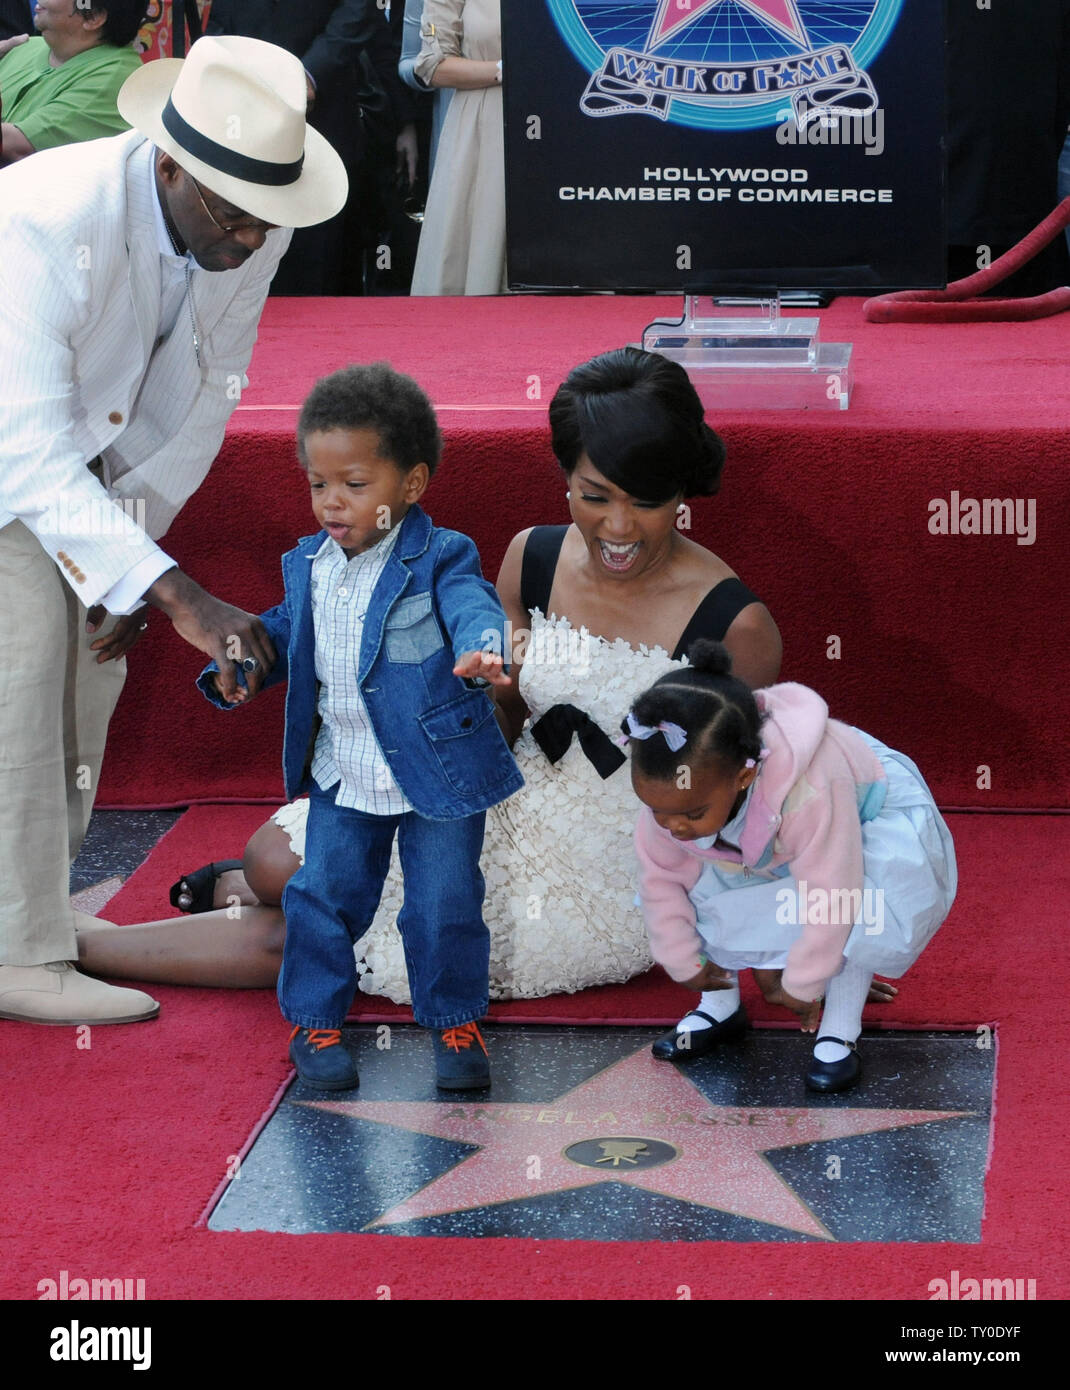 Actress Angela Bassett laughs as her son Slater Josiah and daughter Bronwyn Golden with actor Courtney B. Vance (L), walk on her star on the Hollywood Walk of Fame in Los Angeles on March 20, 2008. Bassett was the 2,358th celebrity to be honored with a star during an unveiling ceremony attended by family, fans and friends.  (UPI Photo/Jim Ruymen) Stock Photo